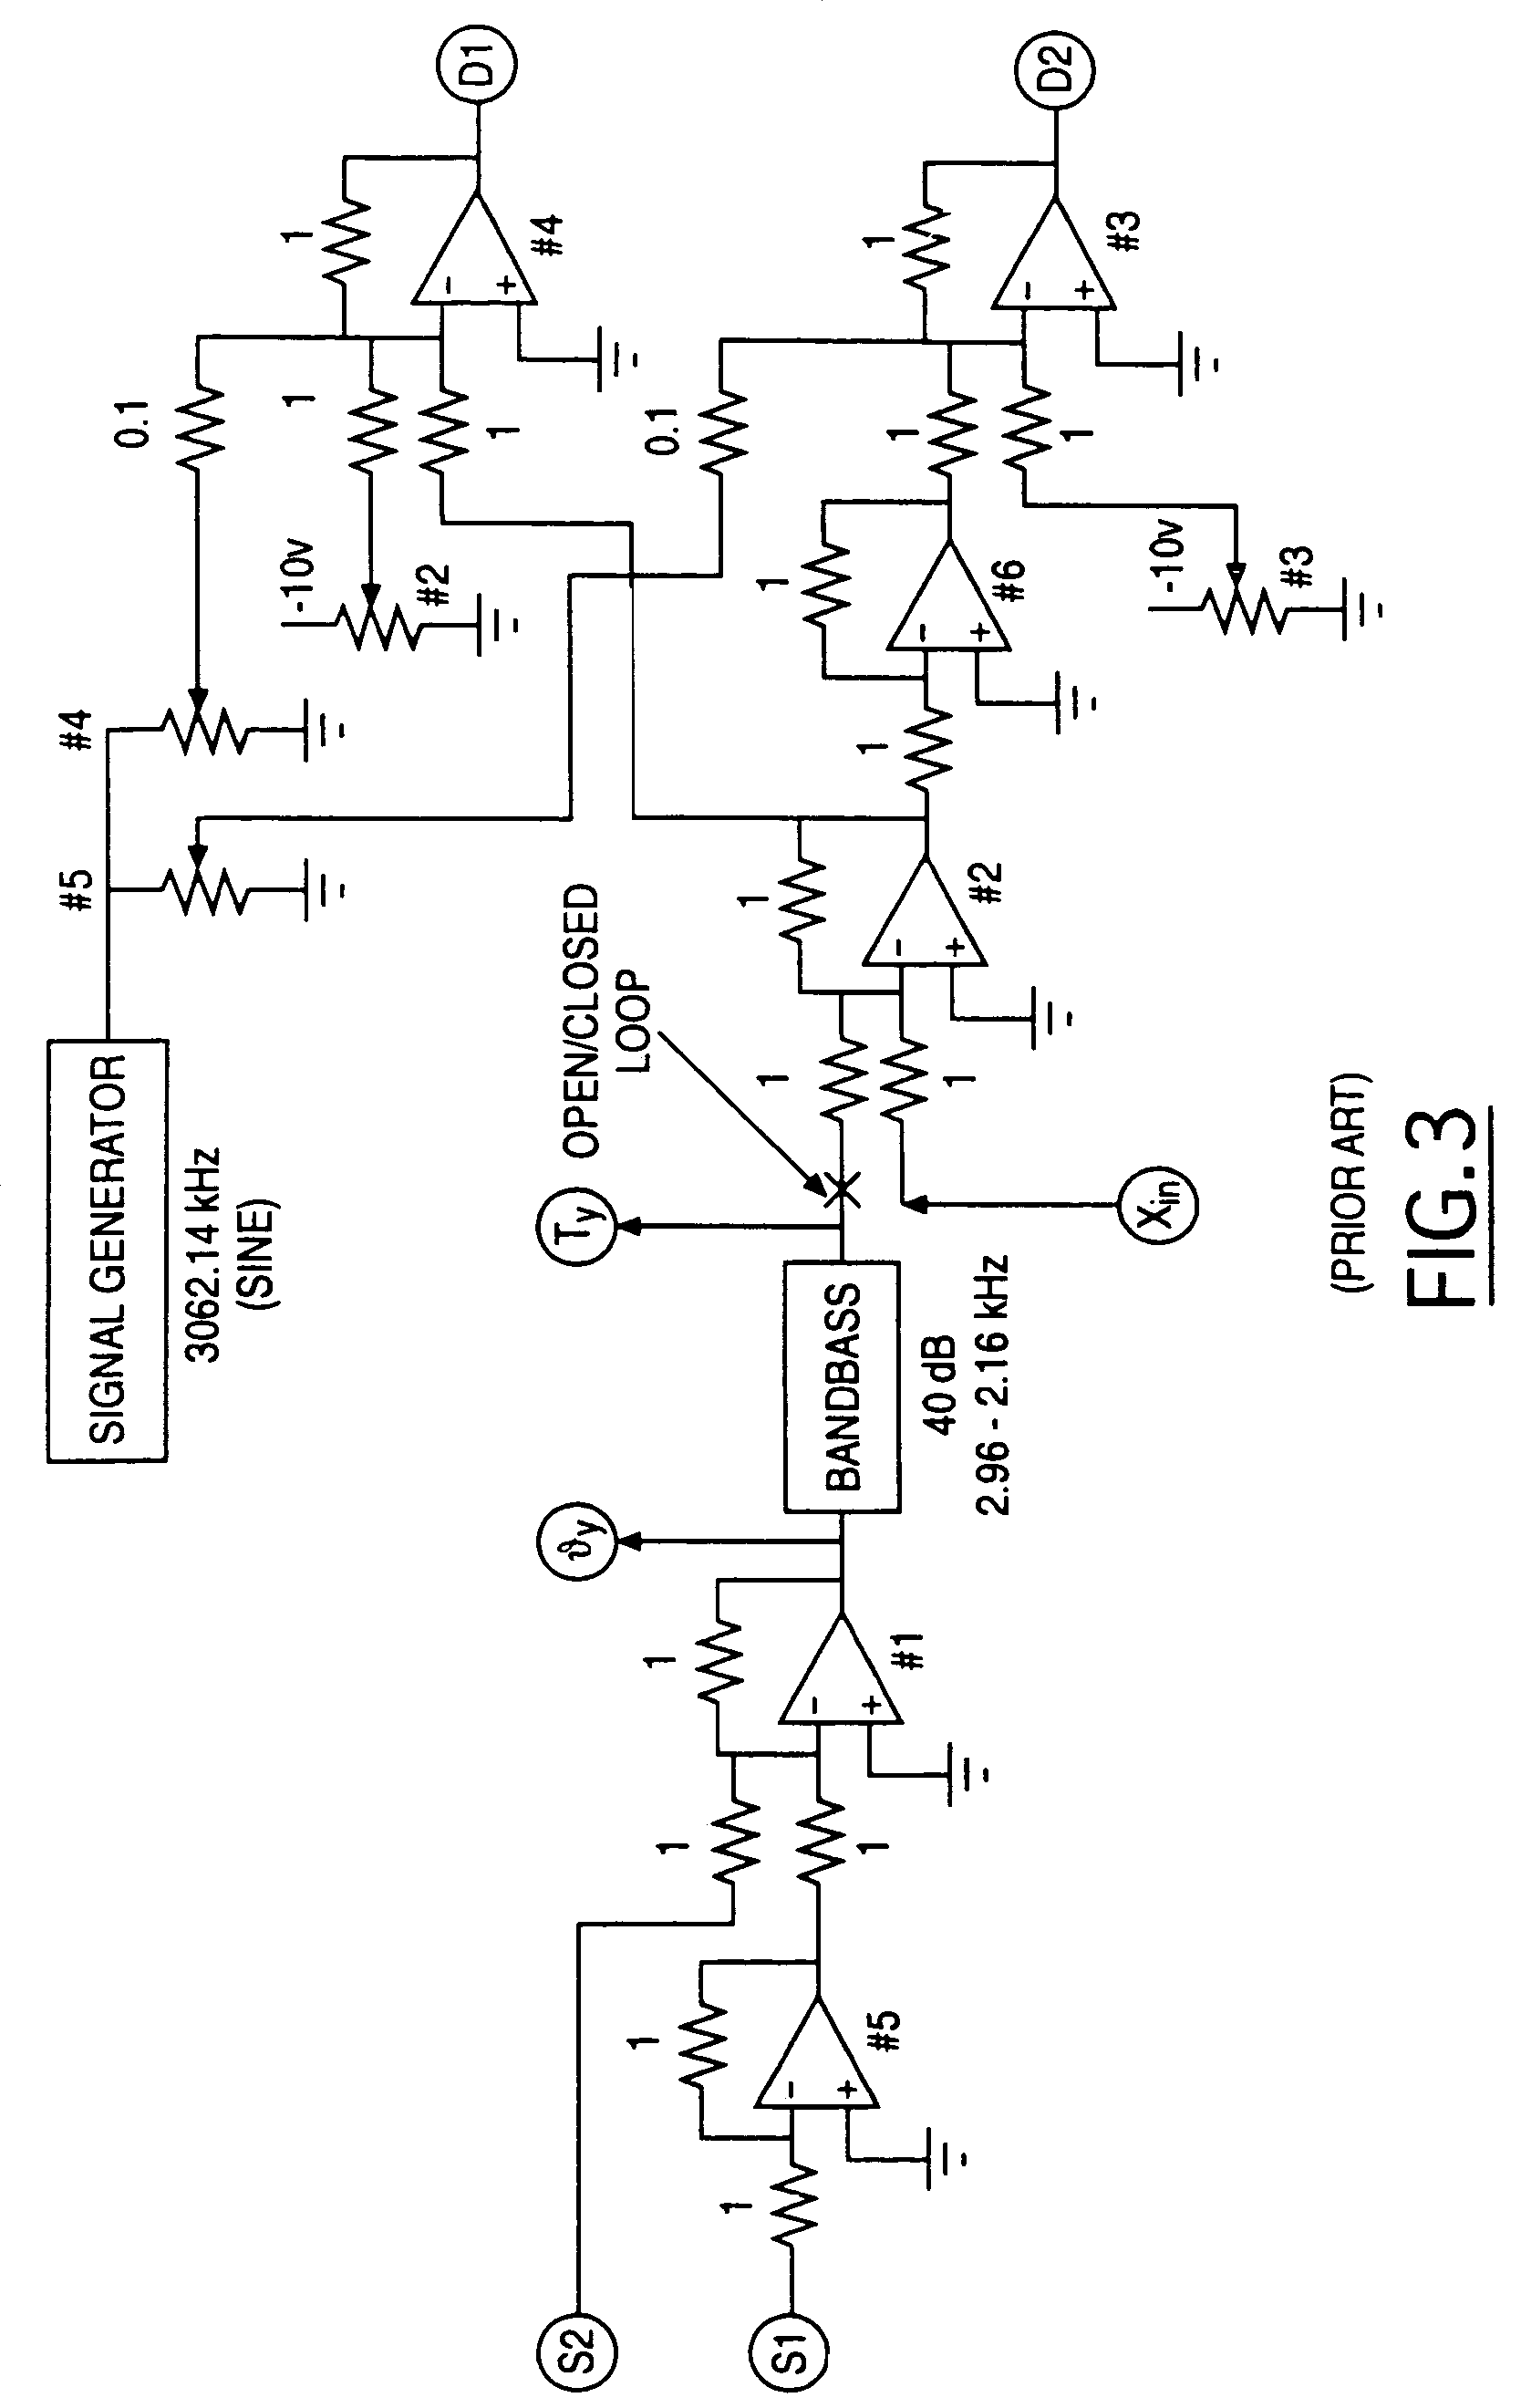 Cloverleaf microgyroscope with electrostatic alignment and tuning